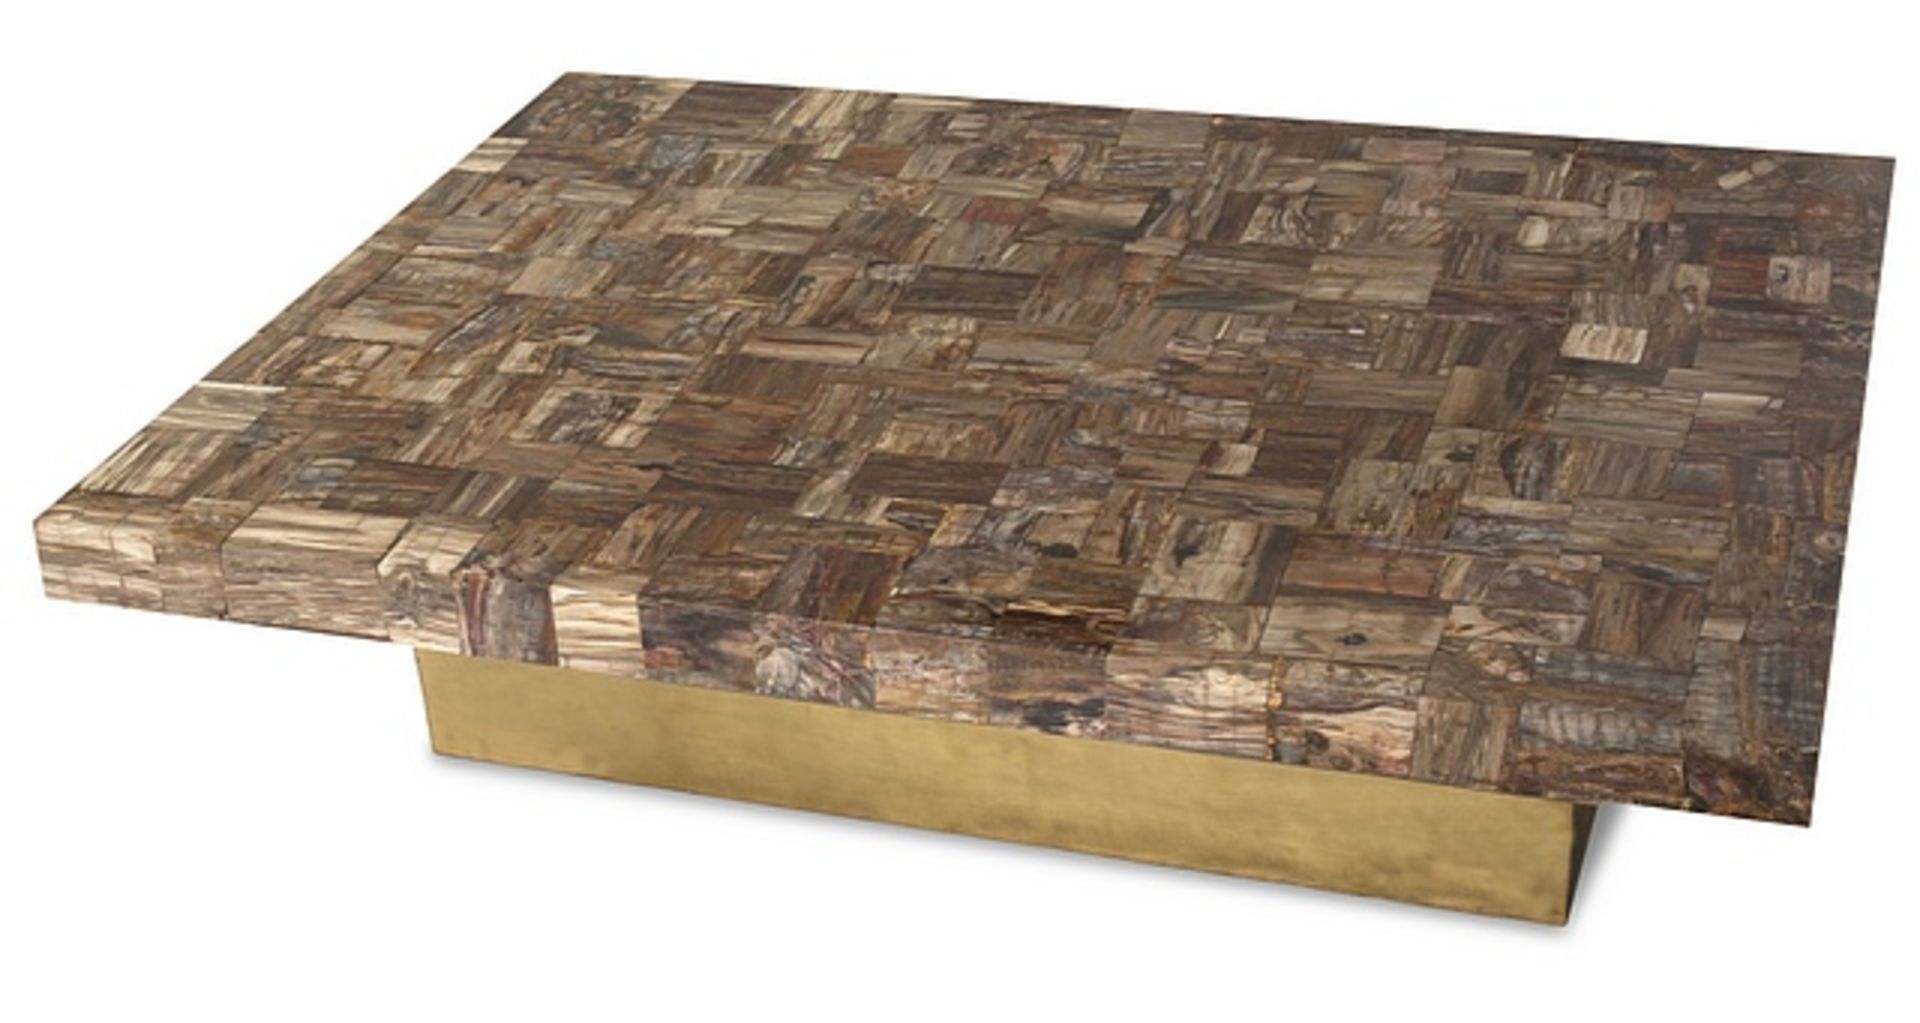 Coffee Table contemporary style, large rectangular low level petrified wood table with textured matt - Image 2 of 7